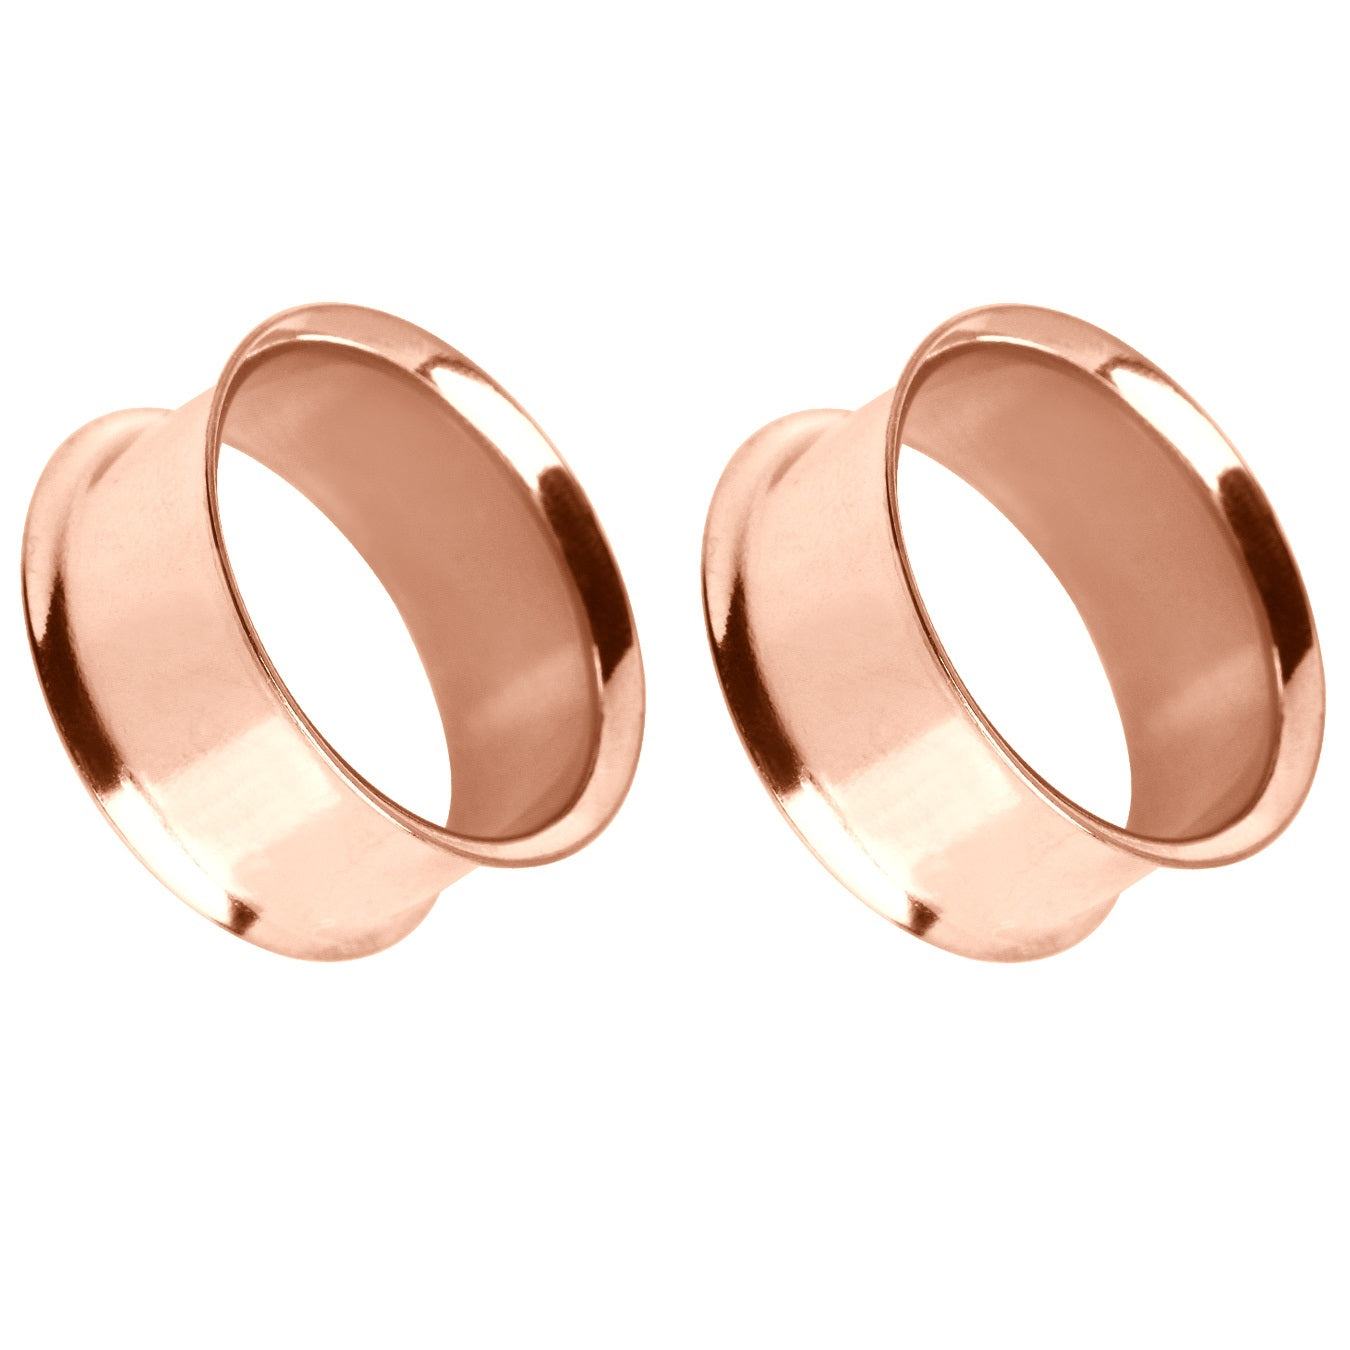 Double Flared Tunnels - Rose Gold Plated Stainless Steel - Pair